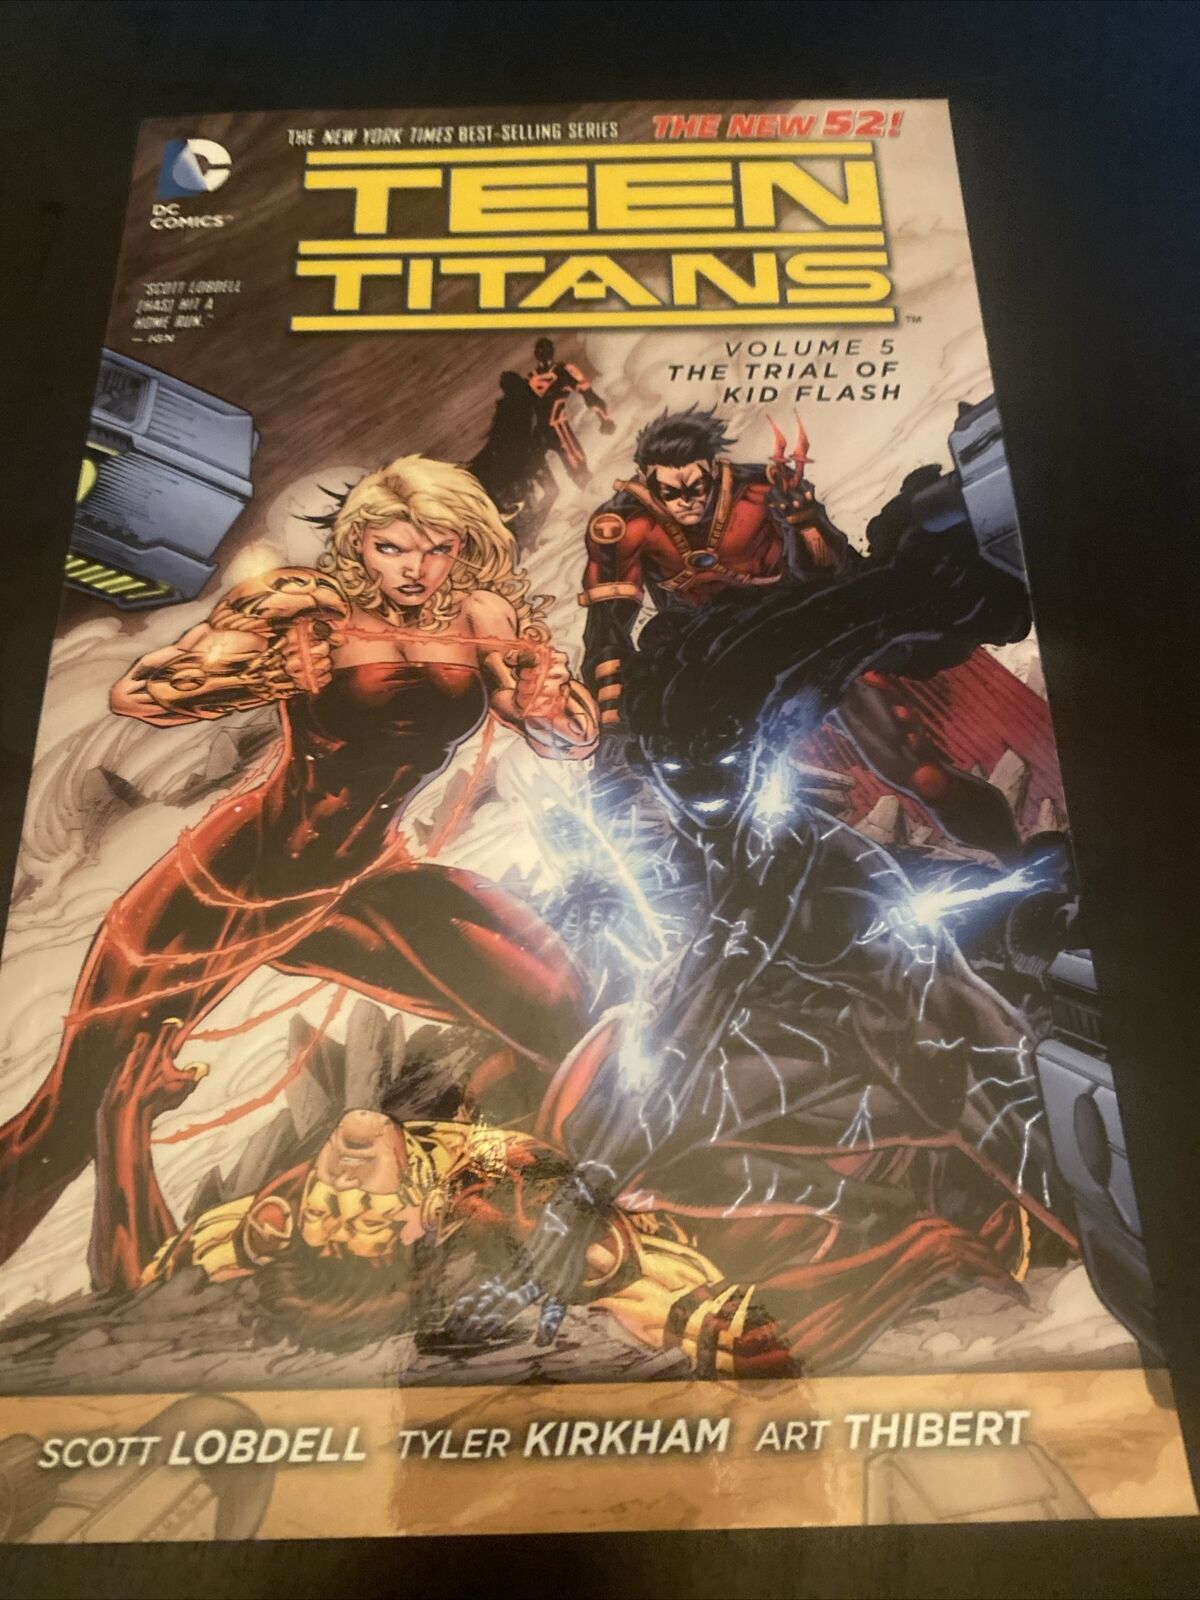 Teen Titans # 5The Trial of Kid Flash The New 52 TPB. DC Comics. NY Times Seller